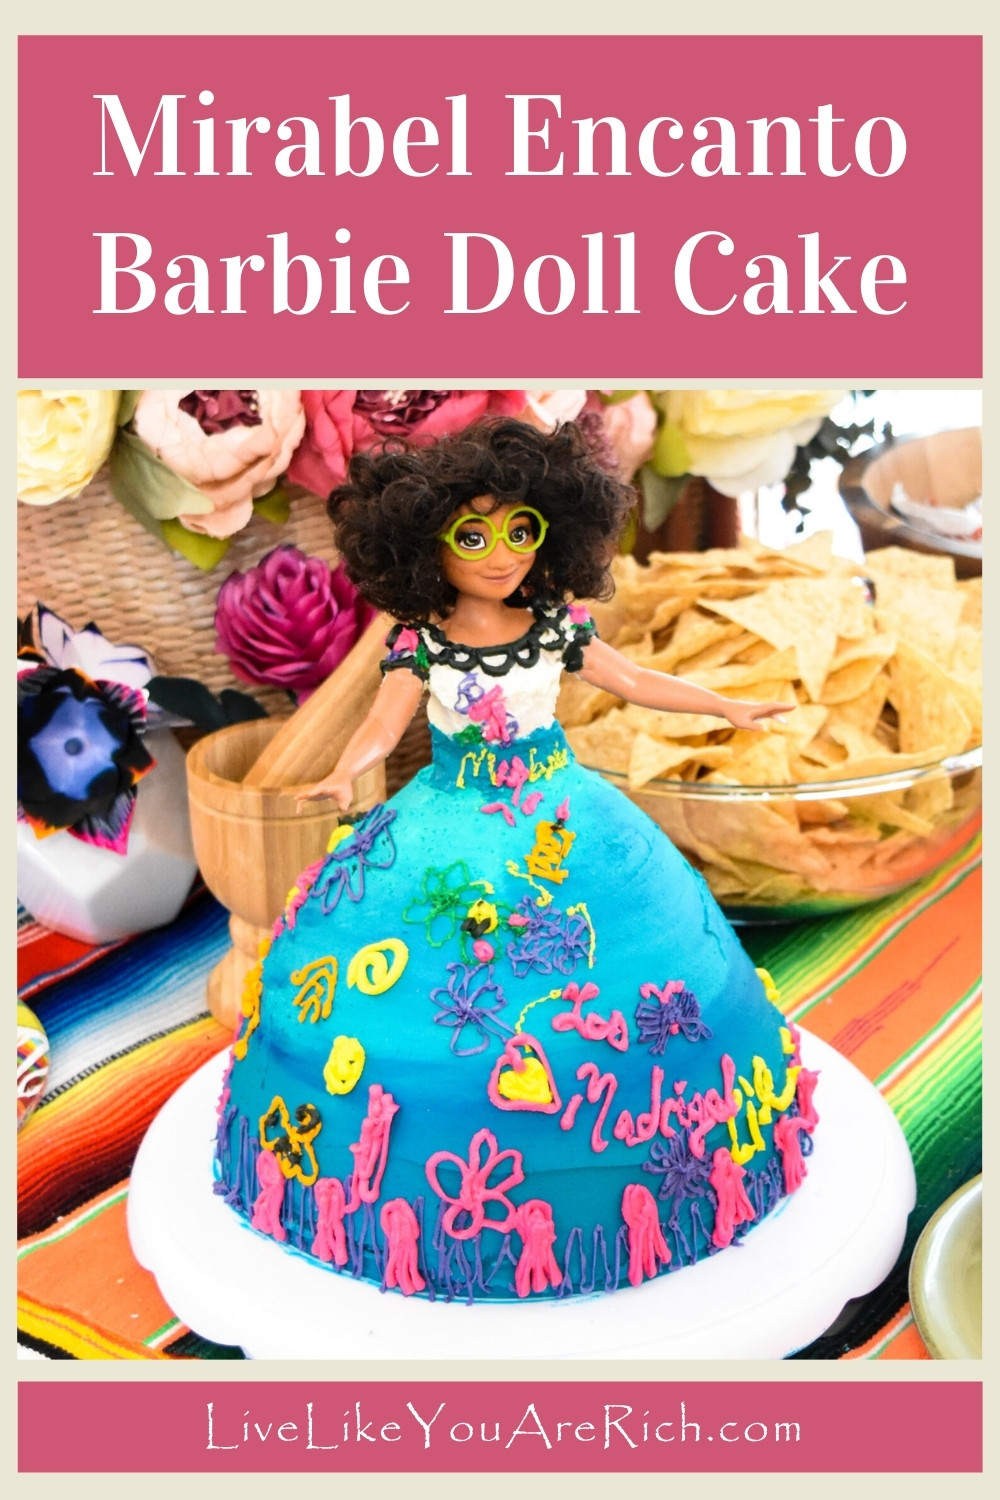 Mirabel Encanto Barbie Doll Cake. Even if you are not a 'professional cake maker' using cake mixes, a barbie doll mold pan, and a proven frosting recipe and food coloring, you can make a beautiful Mirabel cake too. Simply follow this tutorial/video.